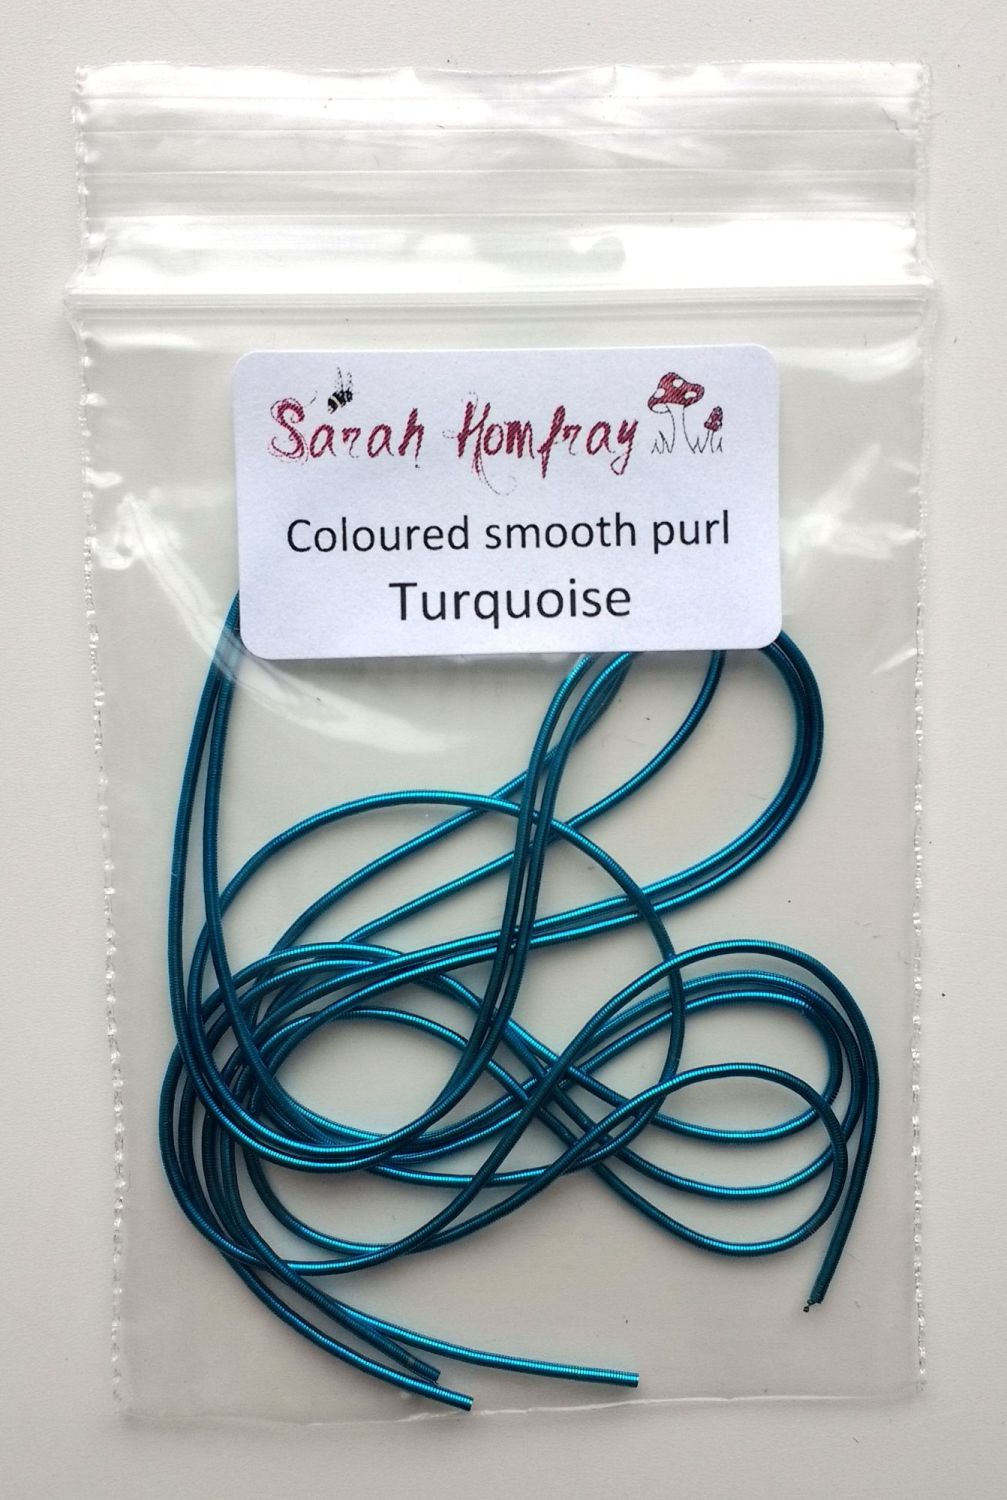 Coloured smooth purl no.6 - Turquoise